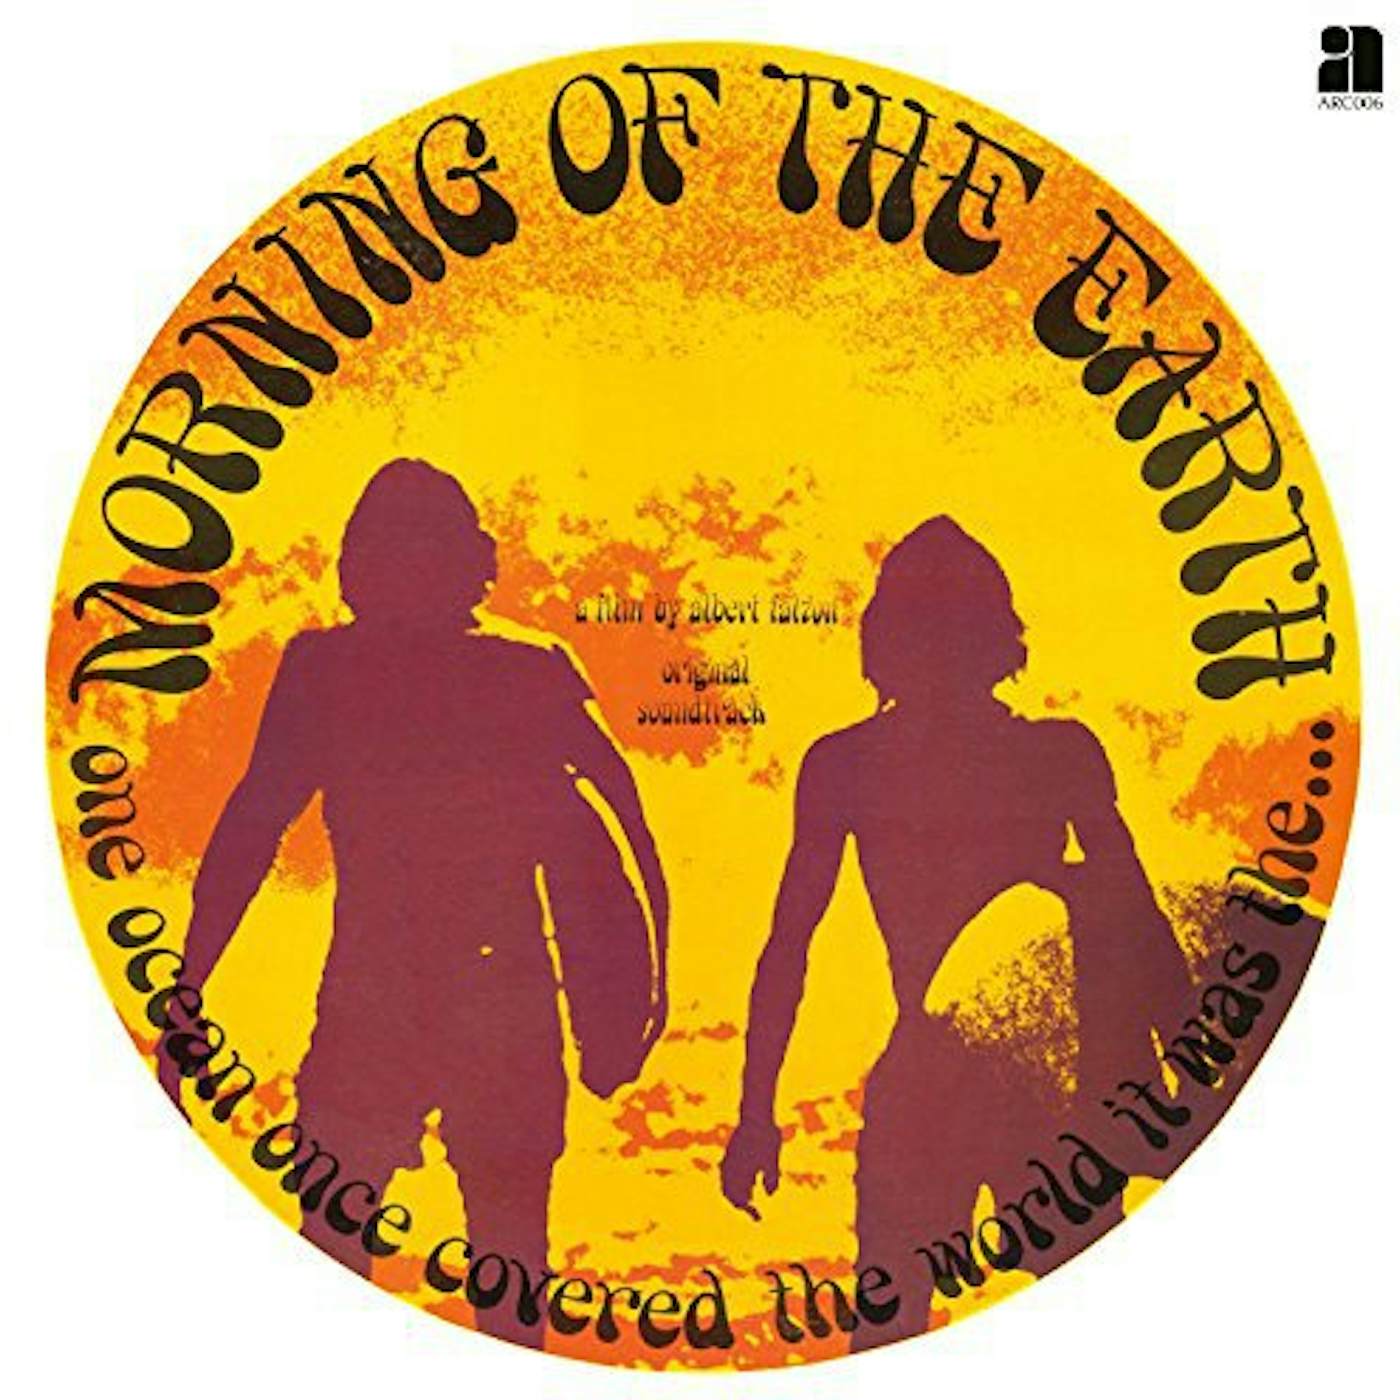 MORNING OF THE EARTH / O.S.T. Vinyl Record